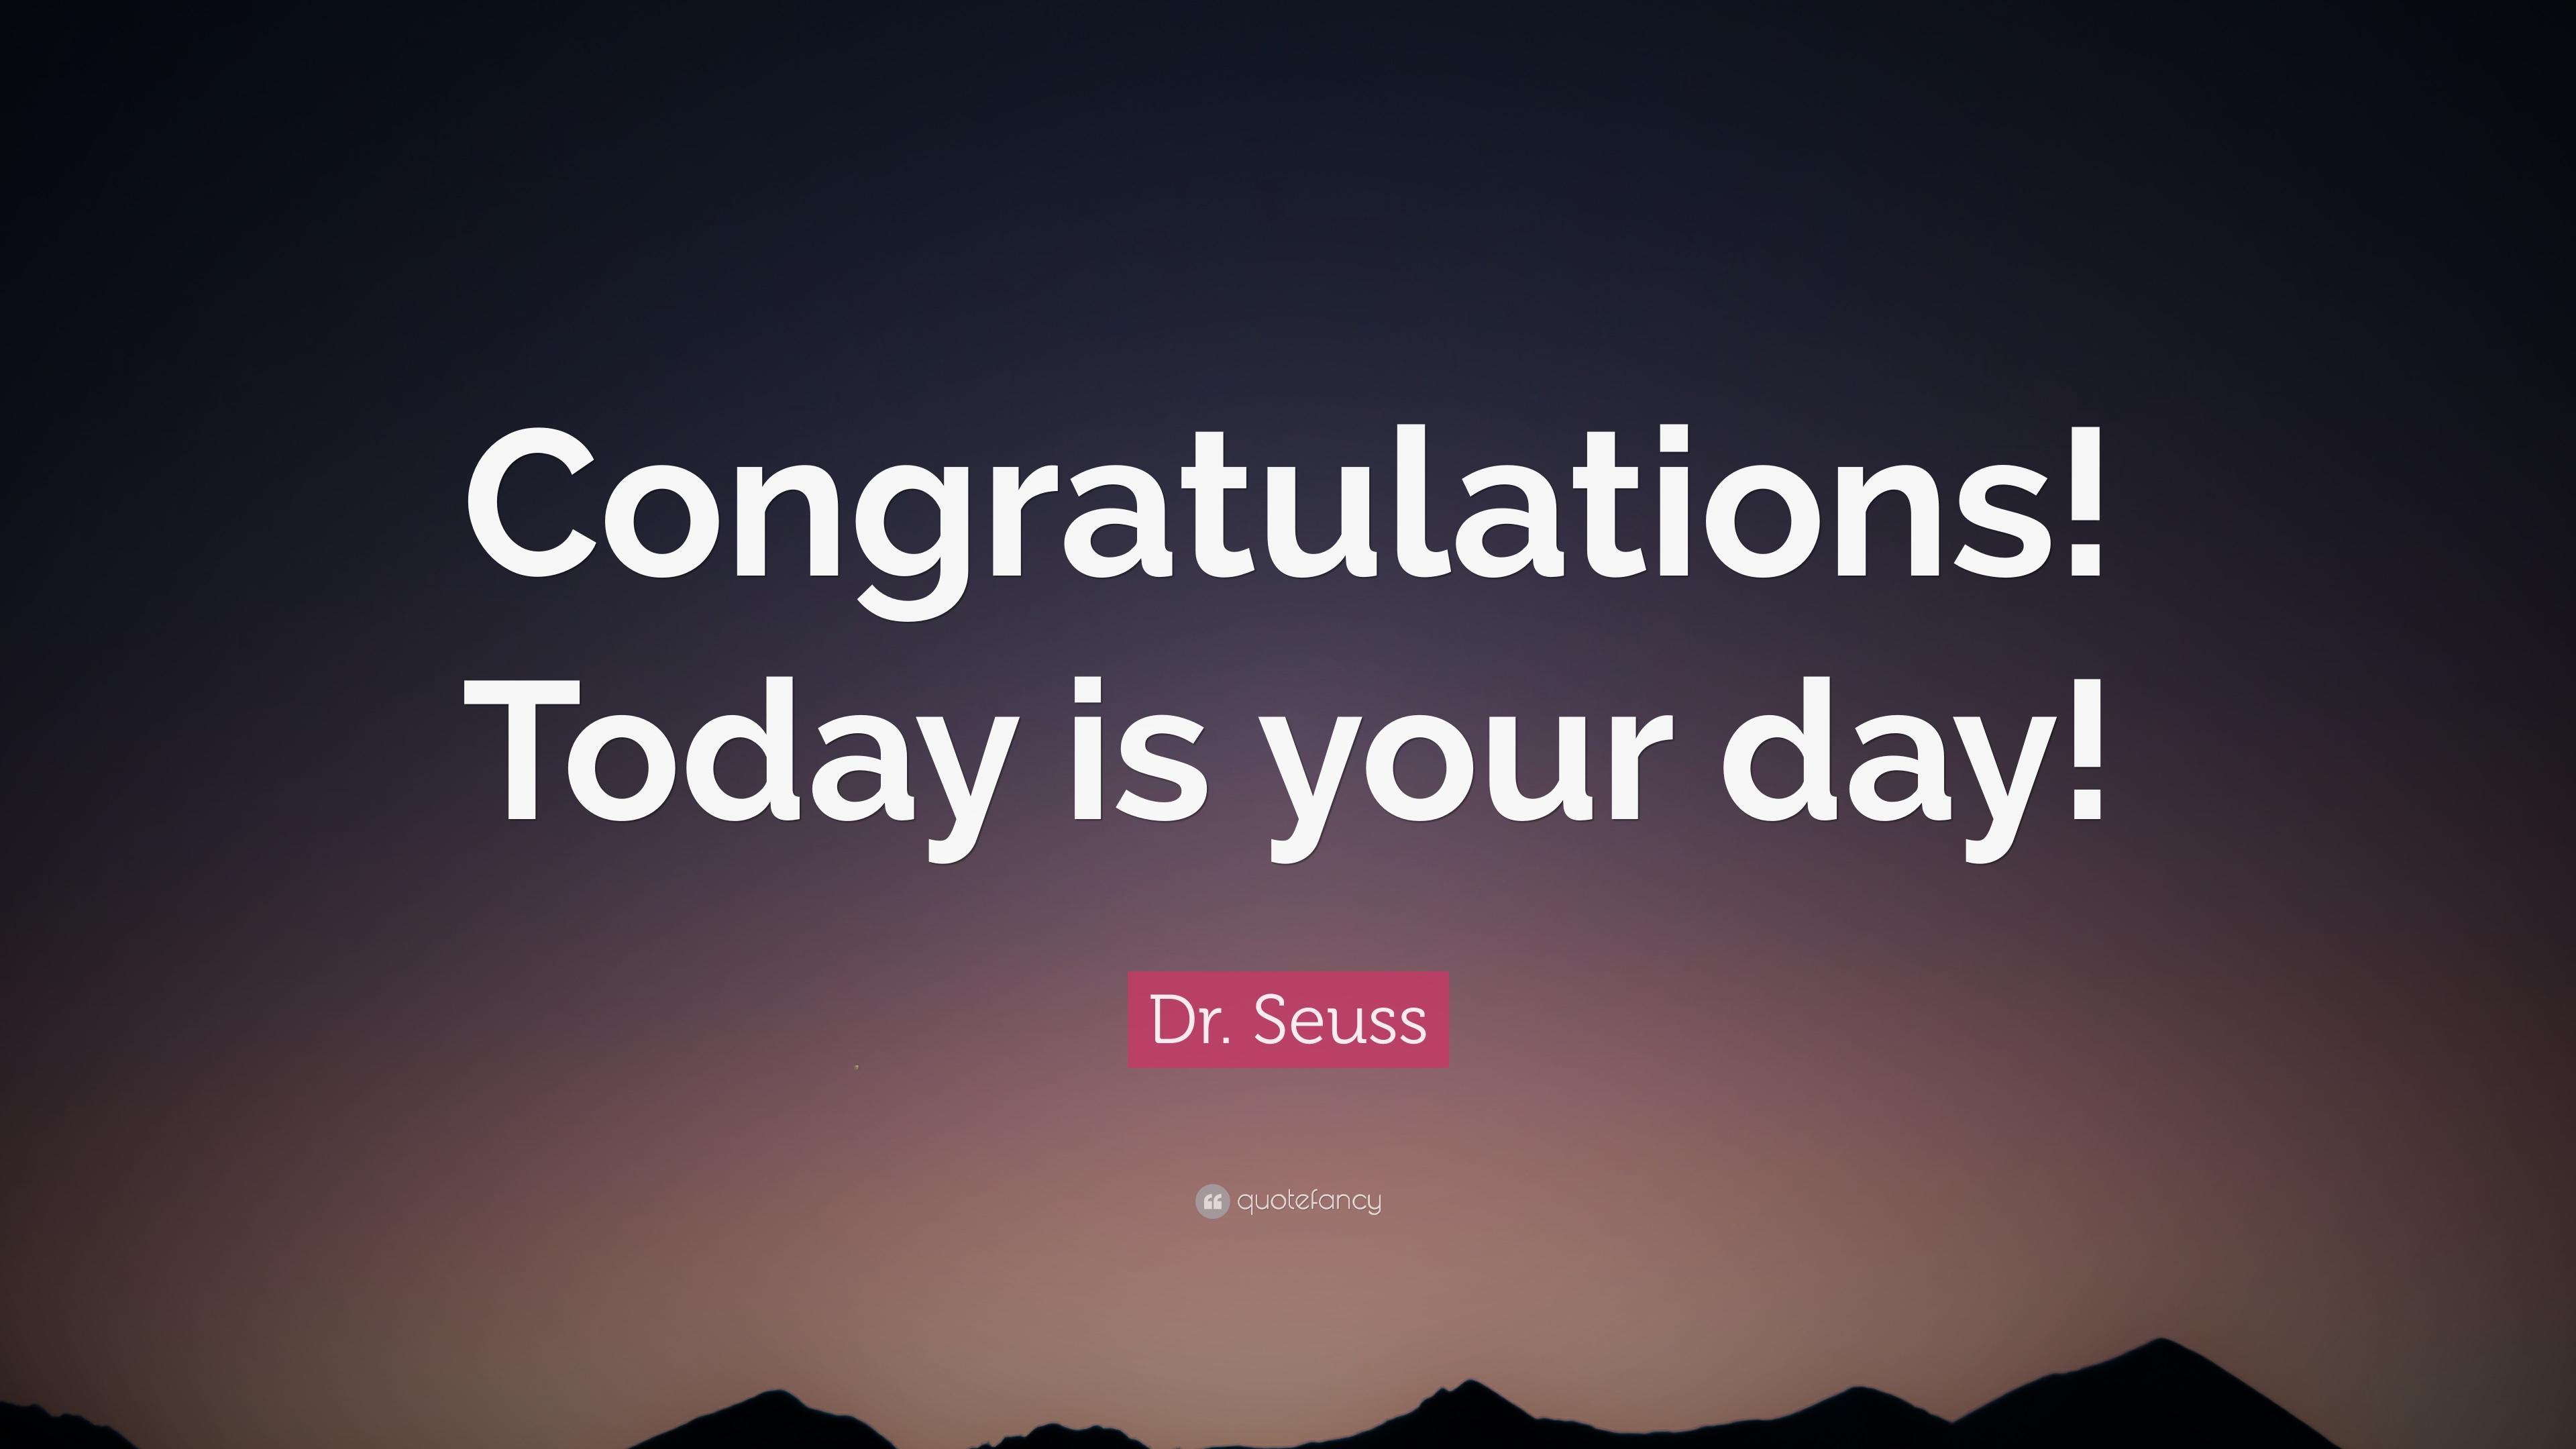 Dr. Seuss Quote: “Congratulations! Today is your day!” 12